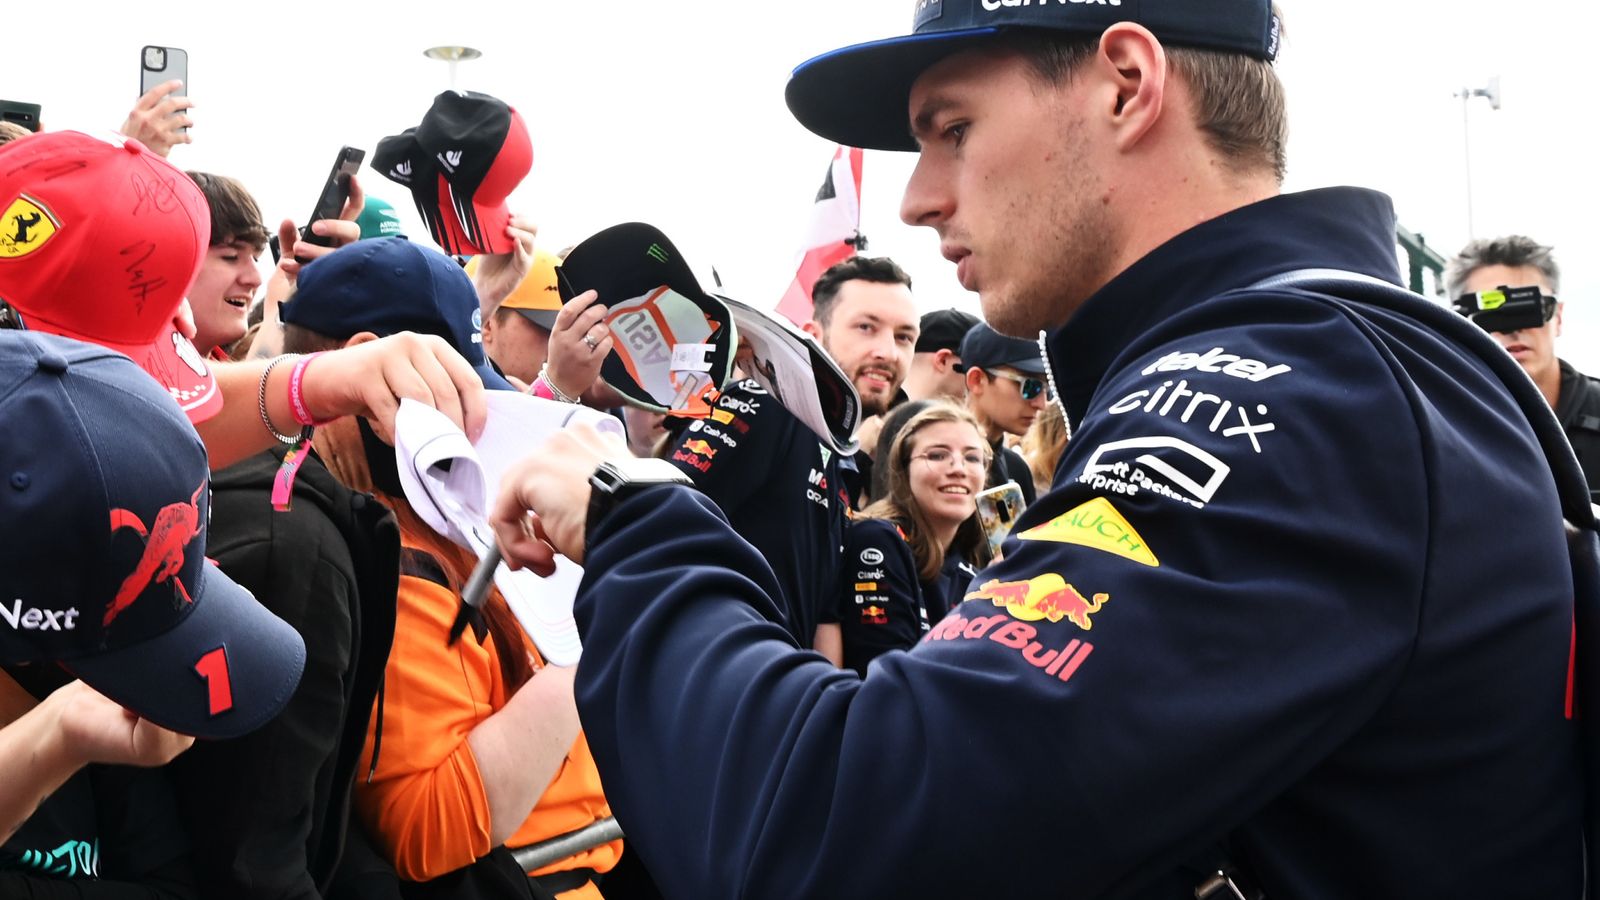 Red Bull boss Christian Horner says Max Verstappen ‘accepts’ British GP boos, and explains silence after Nelson Piquet’s comments